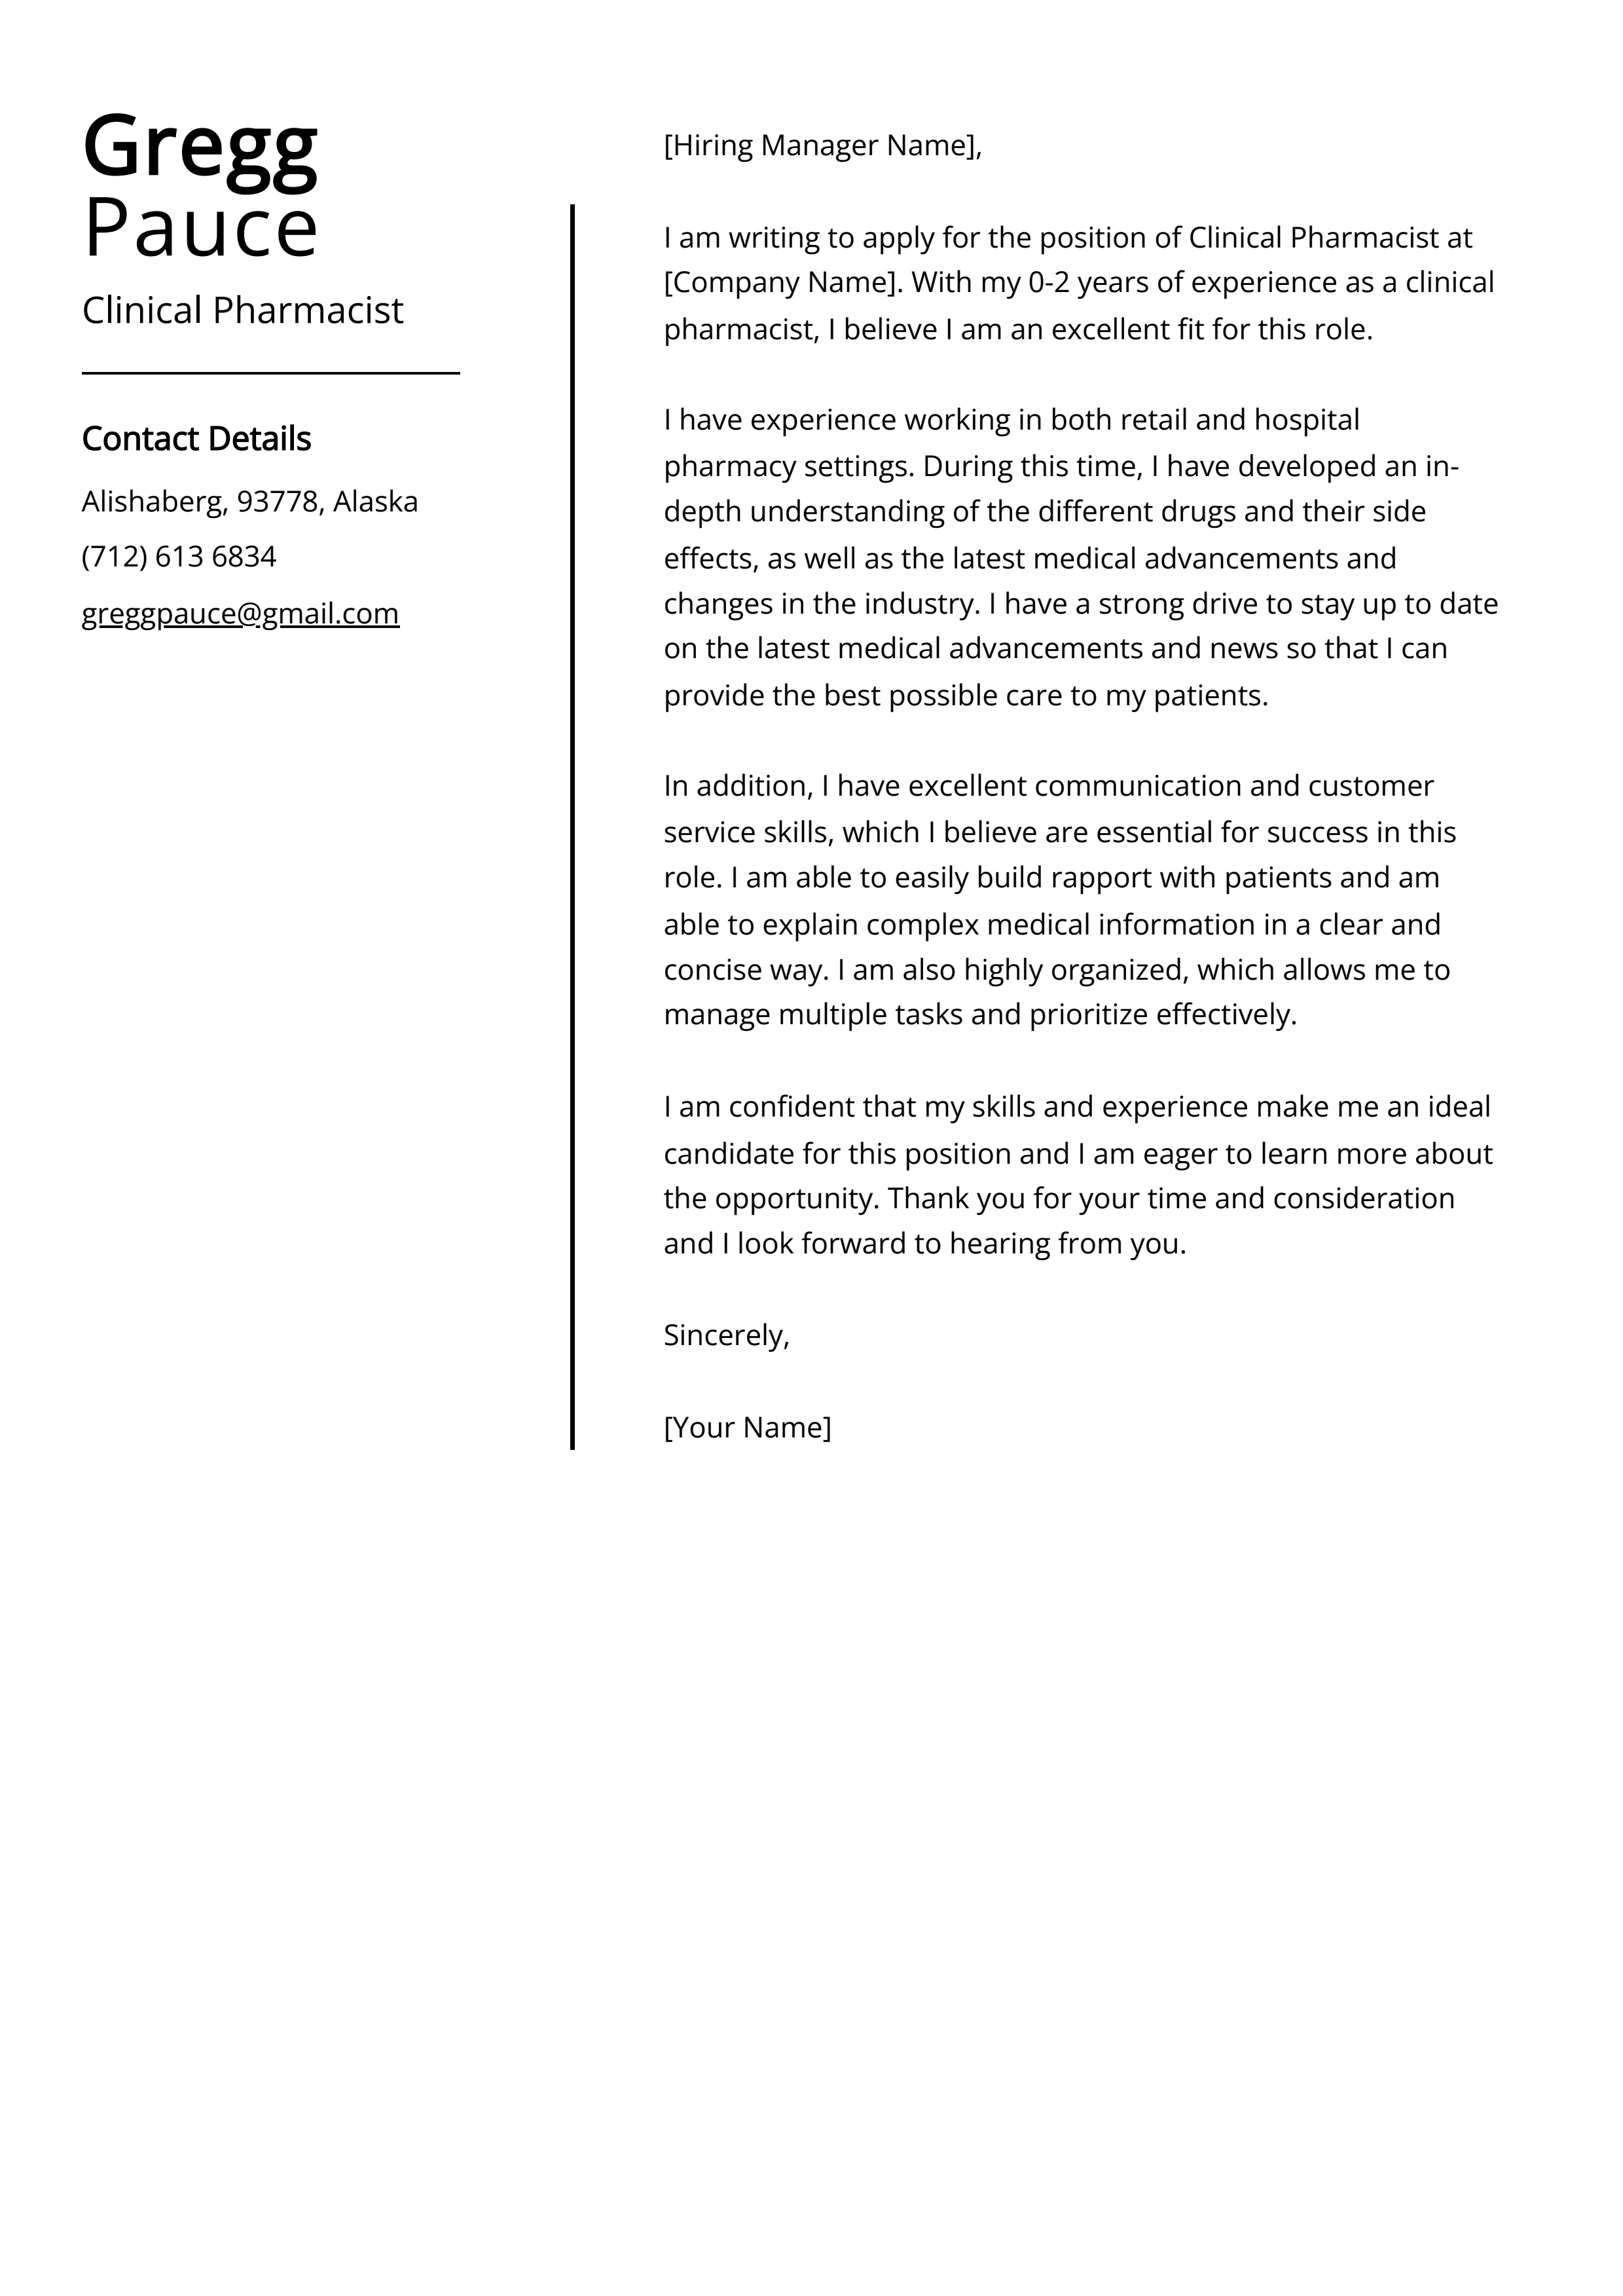 Clinical Pharmacist Cover Letter Example